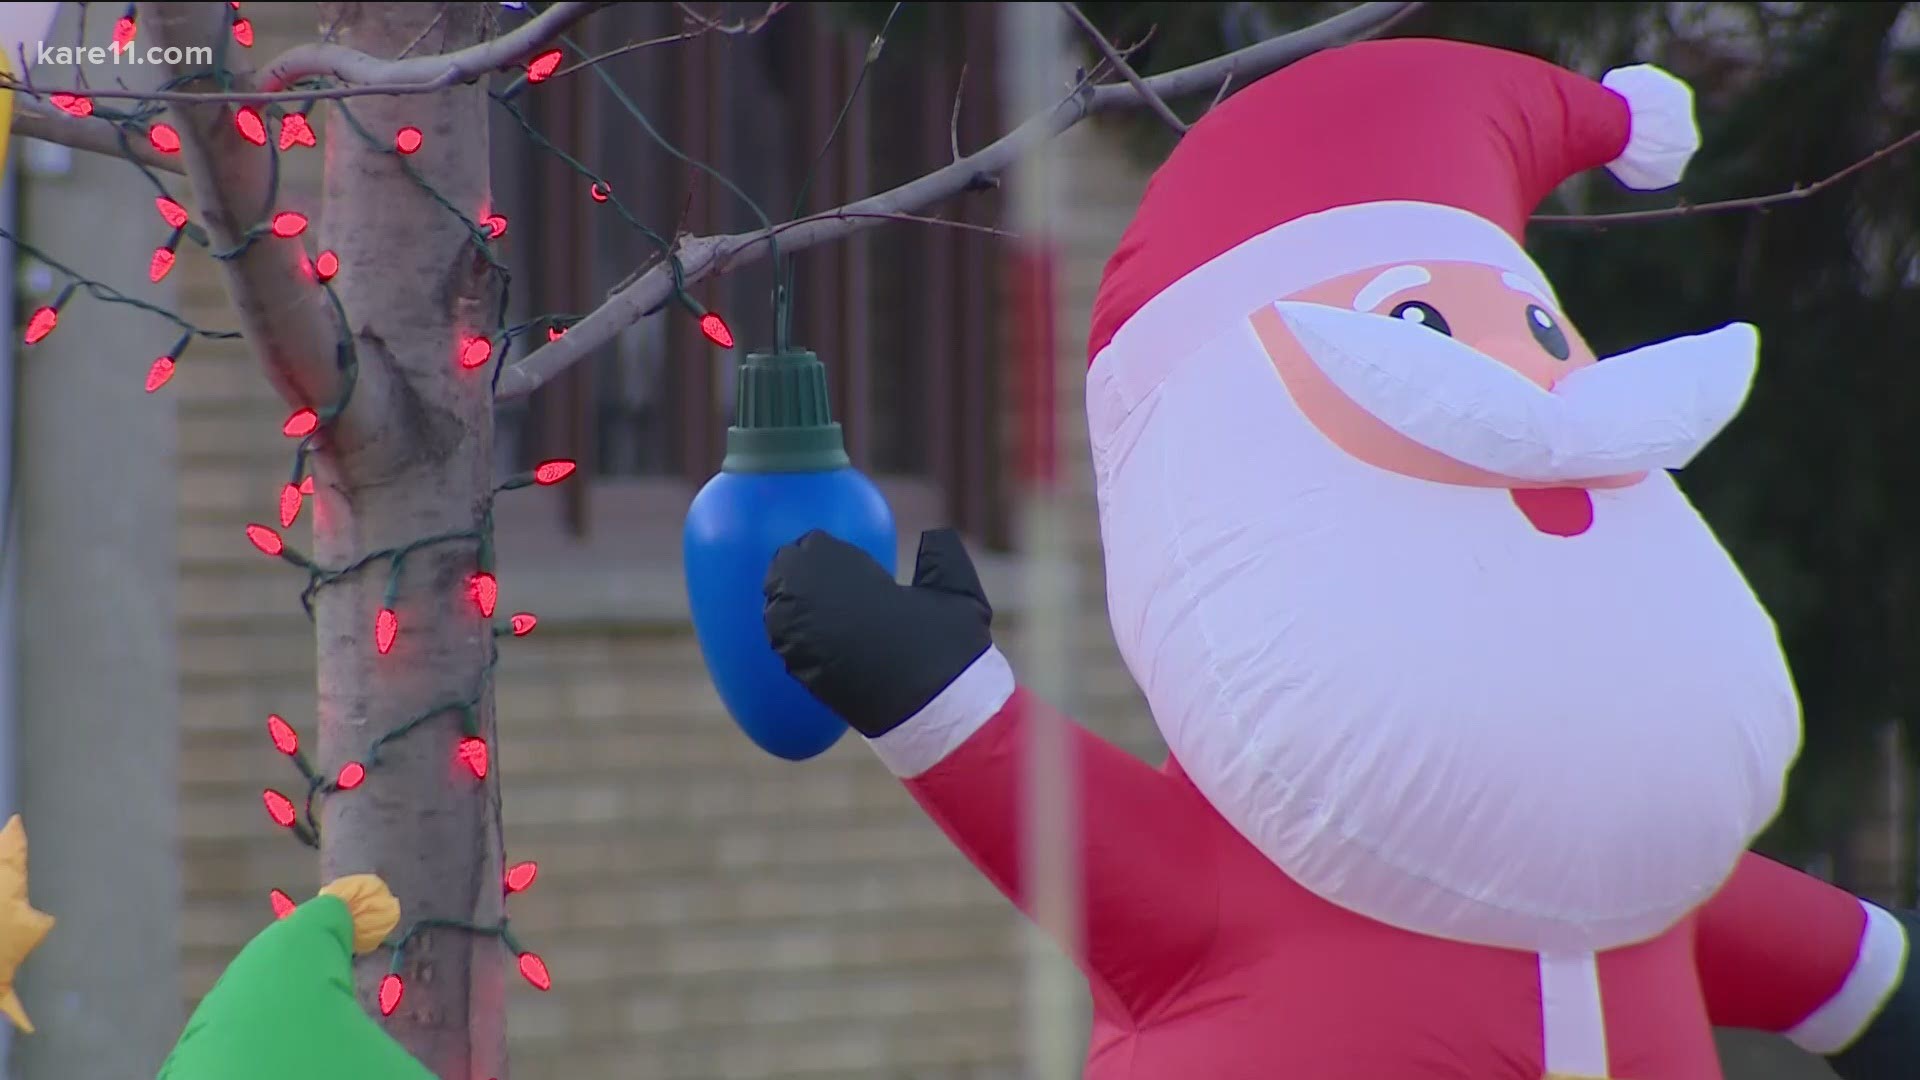 St. Anthony neighbors received an anonymous letter shaming them for their Christmas decorations.